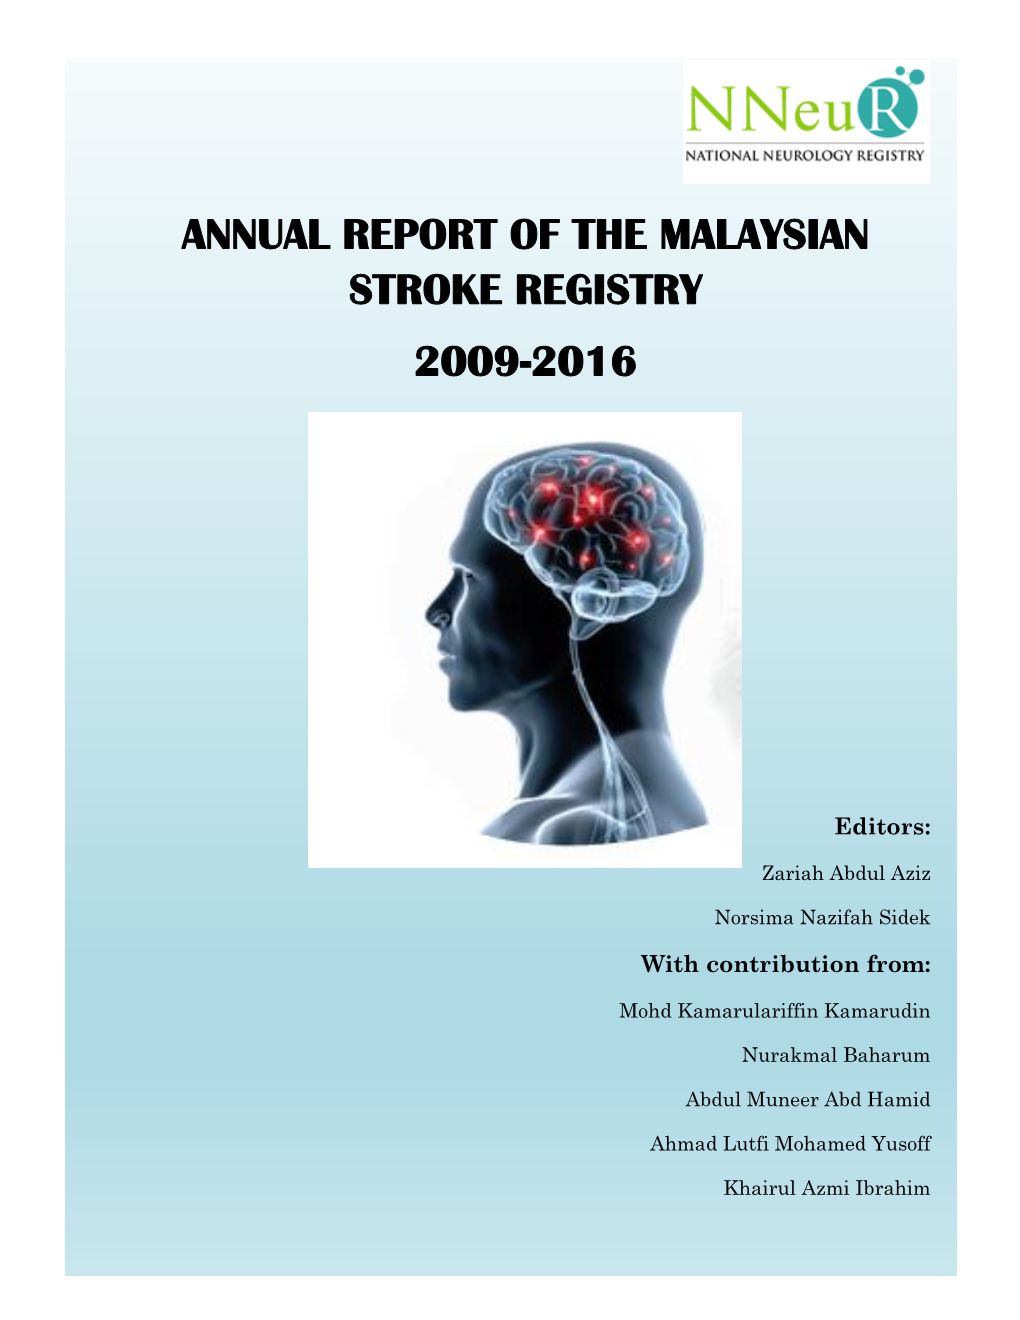 Annual Report of the Malaysian Stroke Registry 2009-2016